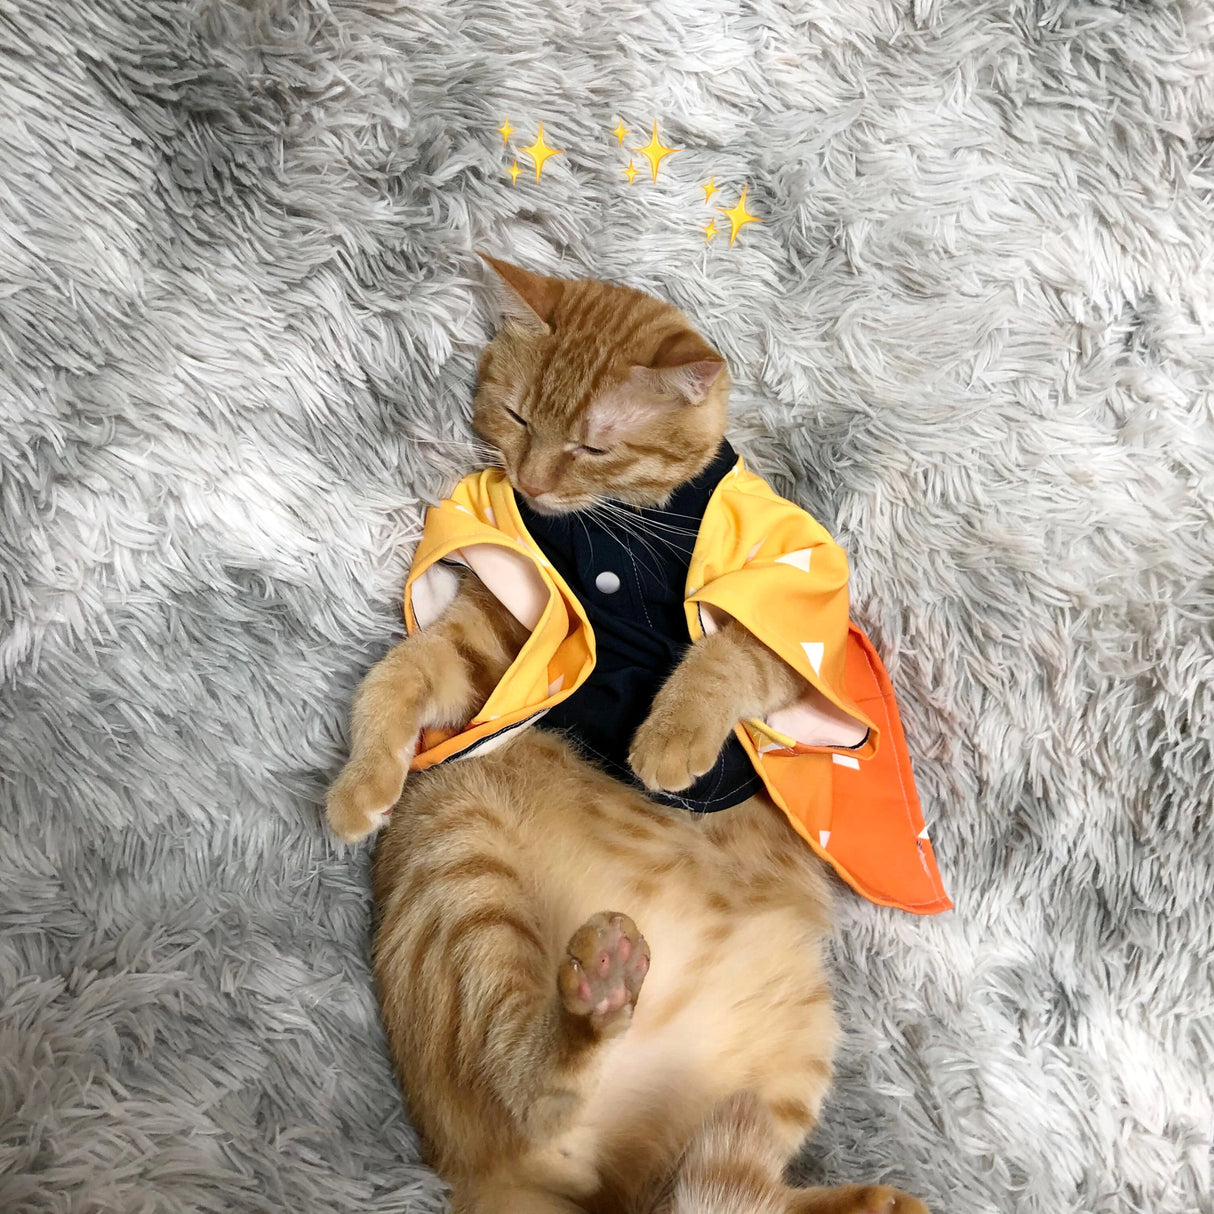 This  cosplay allows your pet to step into the paws of beloved heroes & heroines. If you are looking for more Demon Slayer Merch,We have it all!| Check out all our Anime Merch now!